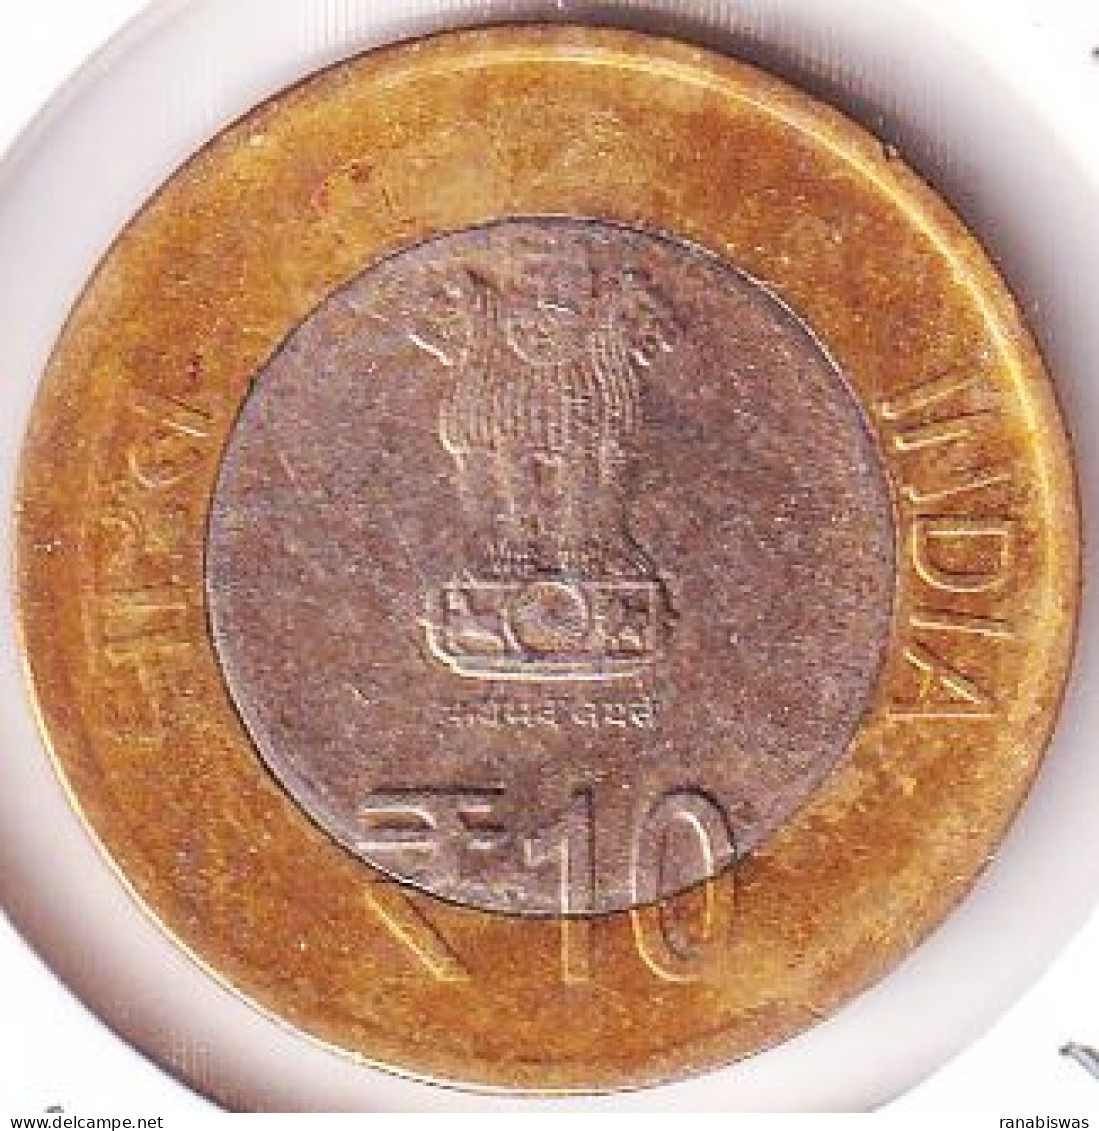 INDIA COIN LOT 450, 10 RUPEES 2016, NATIONAL ARCHIVES, NOIDA MINT, XF, SCARE - Indien